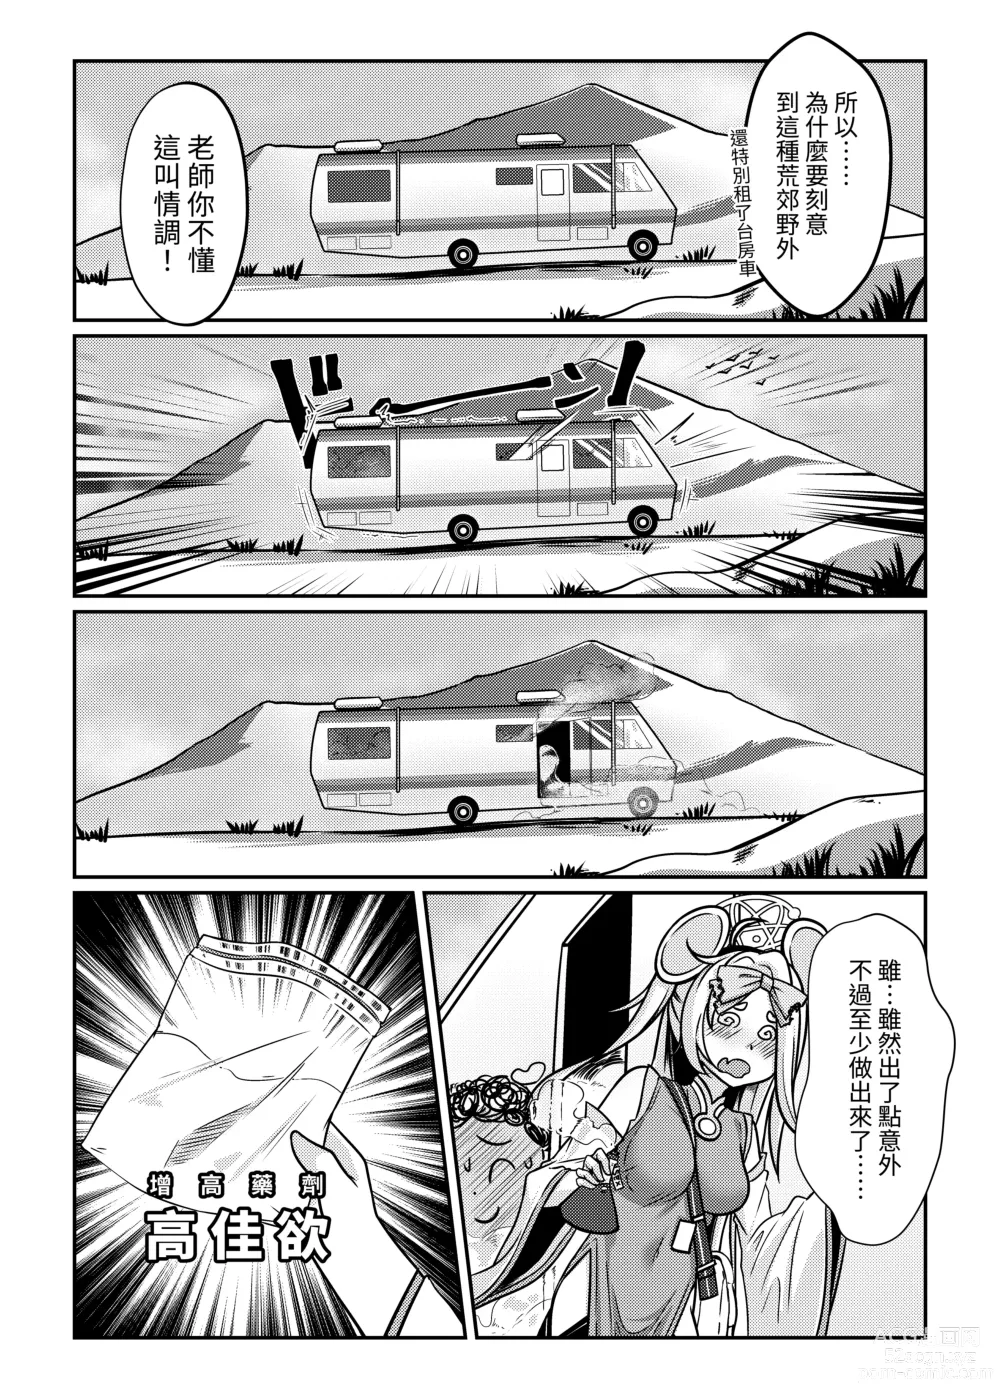 Page 4 of doujinshi 絕命狼師